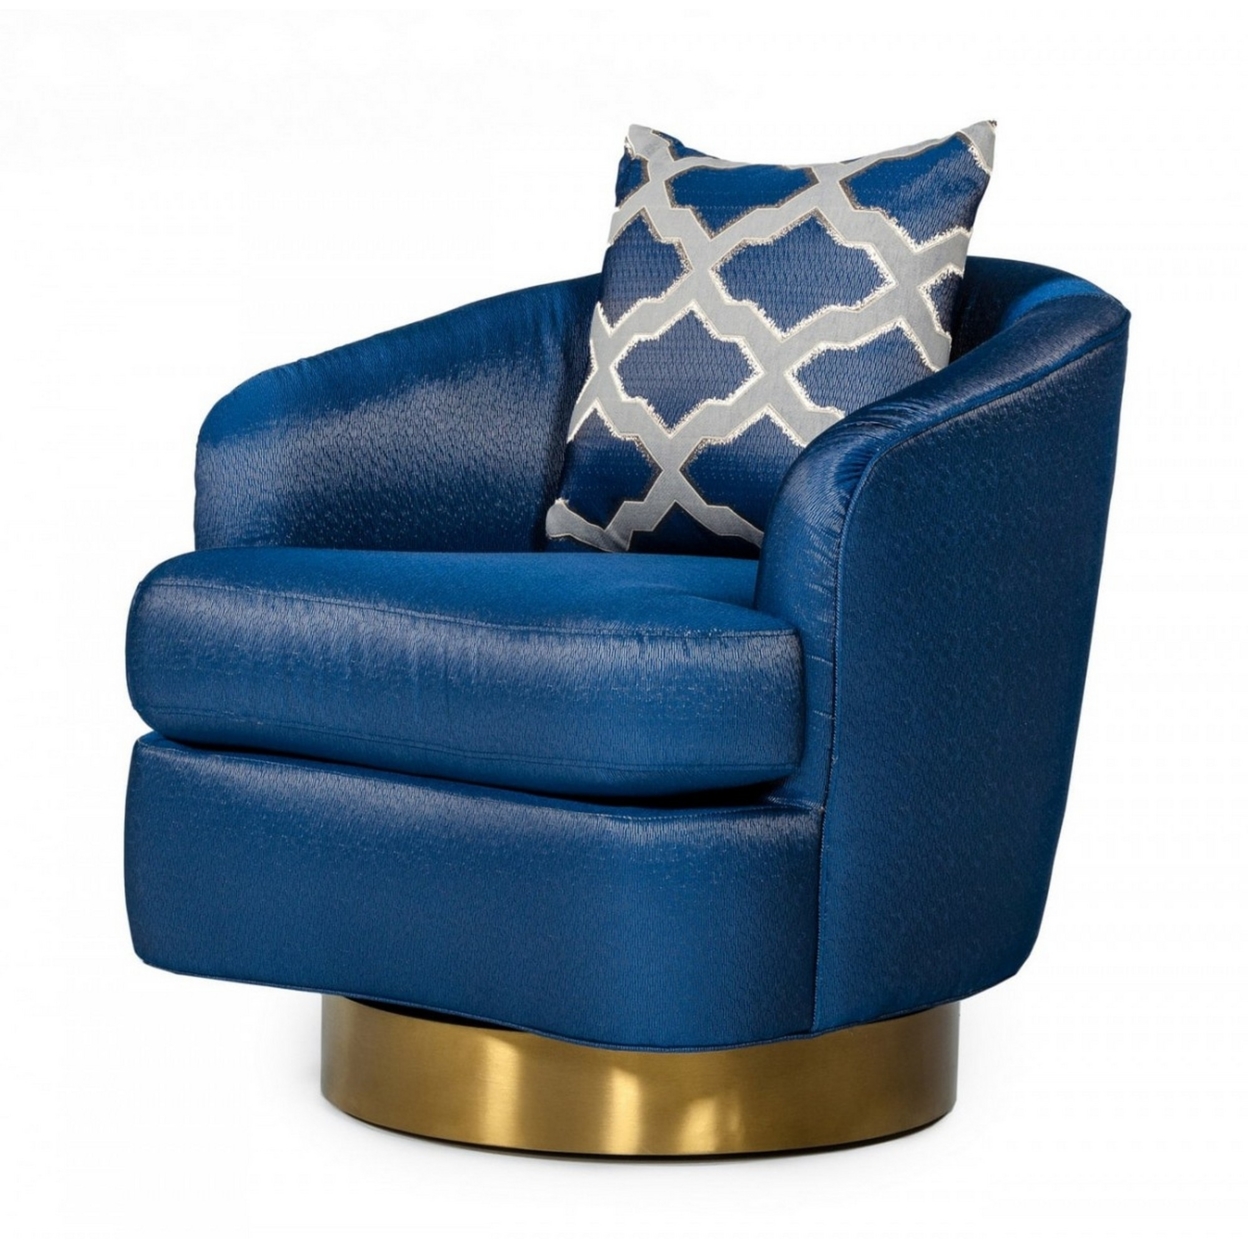 Curved Fabric Accent Chair With Sloping Arms And 1 Pillow, Blue And Gold- Saltoro Sherpi